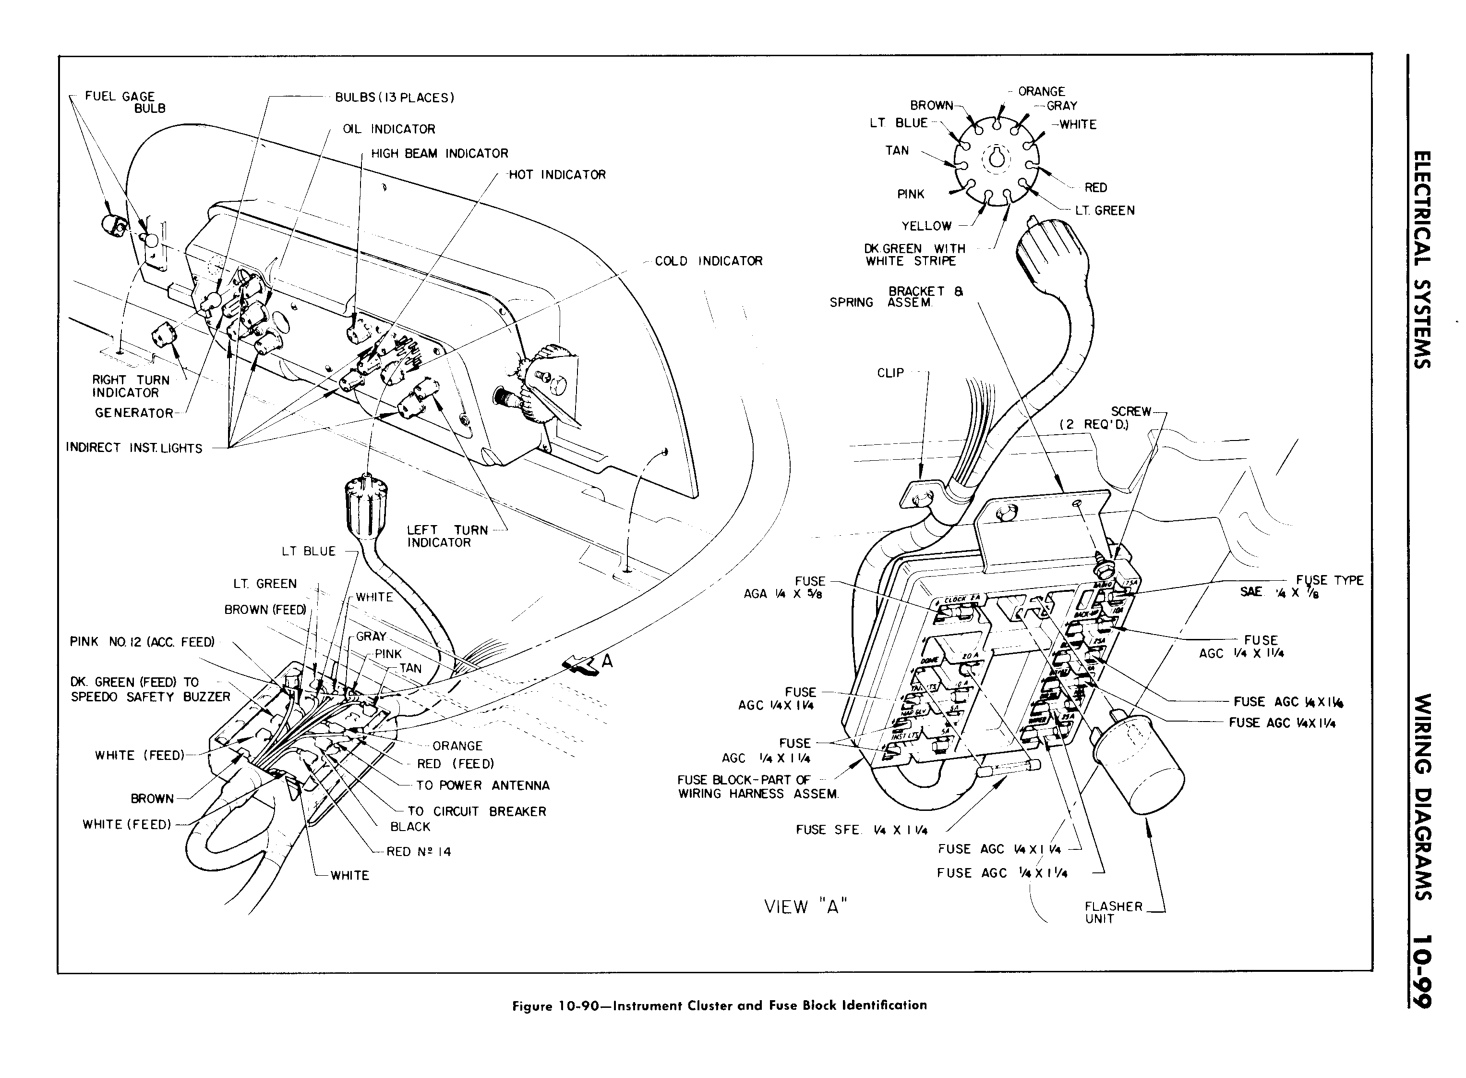 1960 Buick Chassis Service Manual - Electrical Systems Page 99 of 112